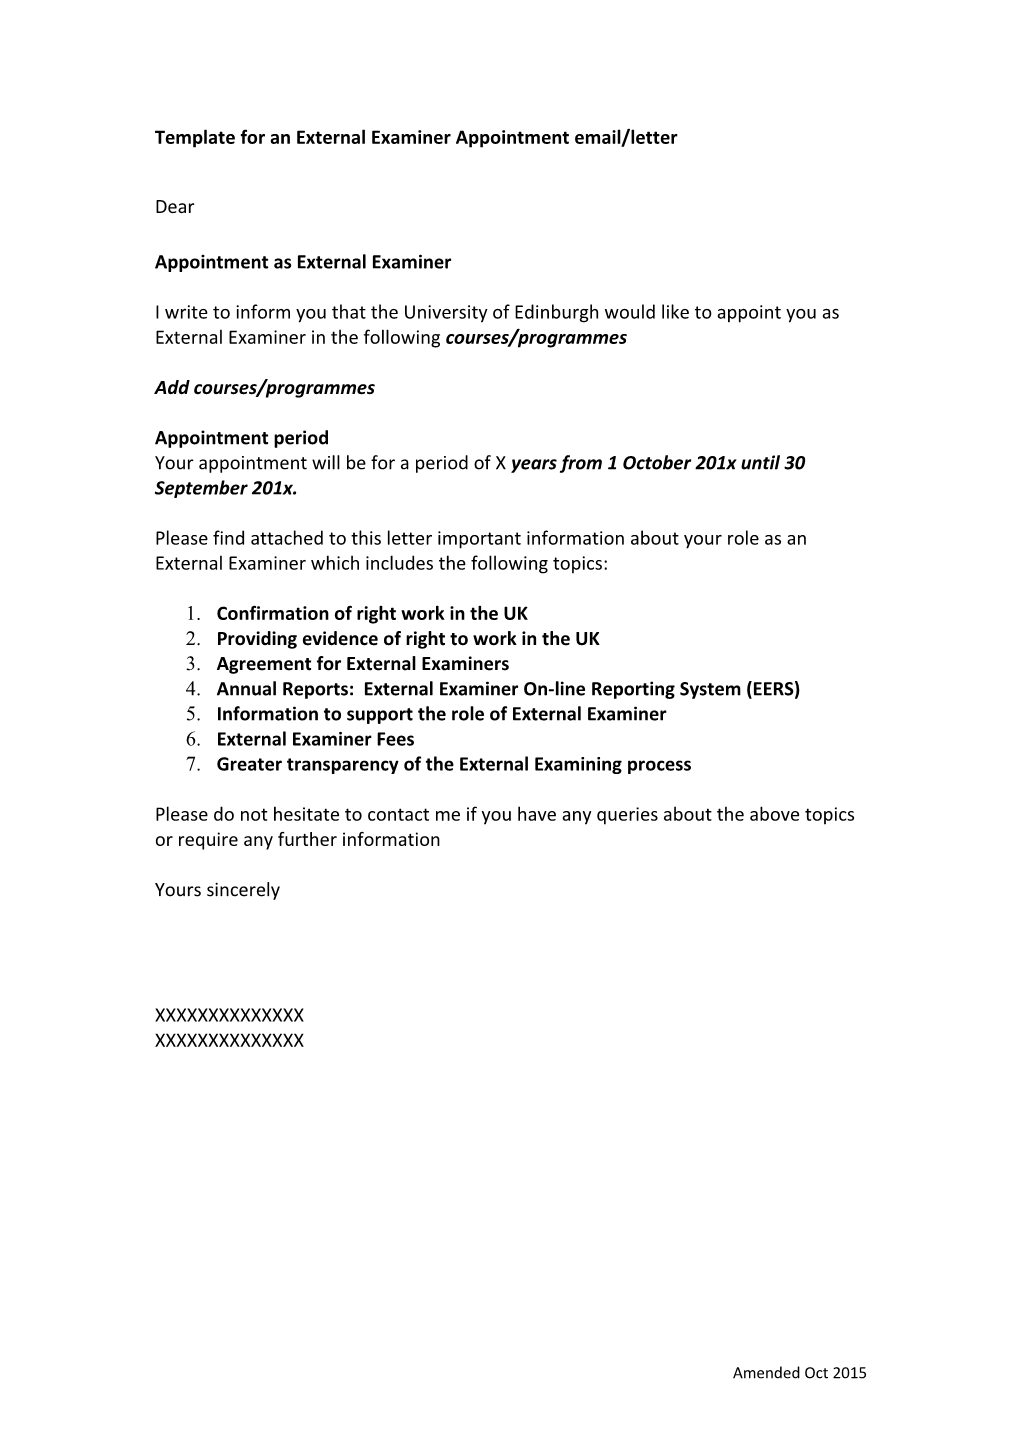 Template for an External Examiner Appointment Email/Letter